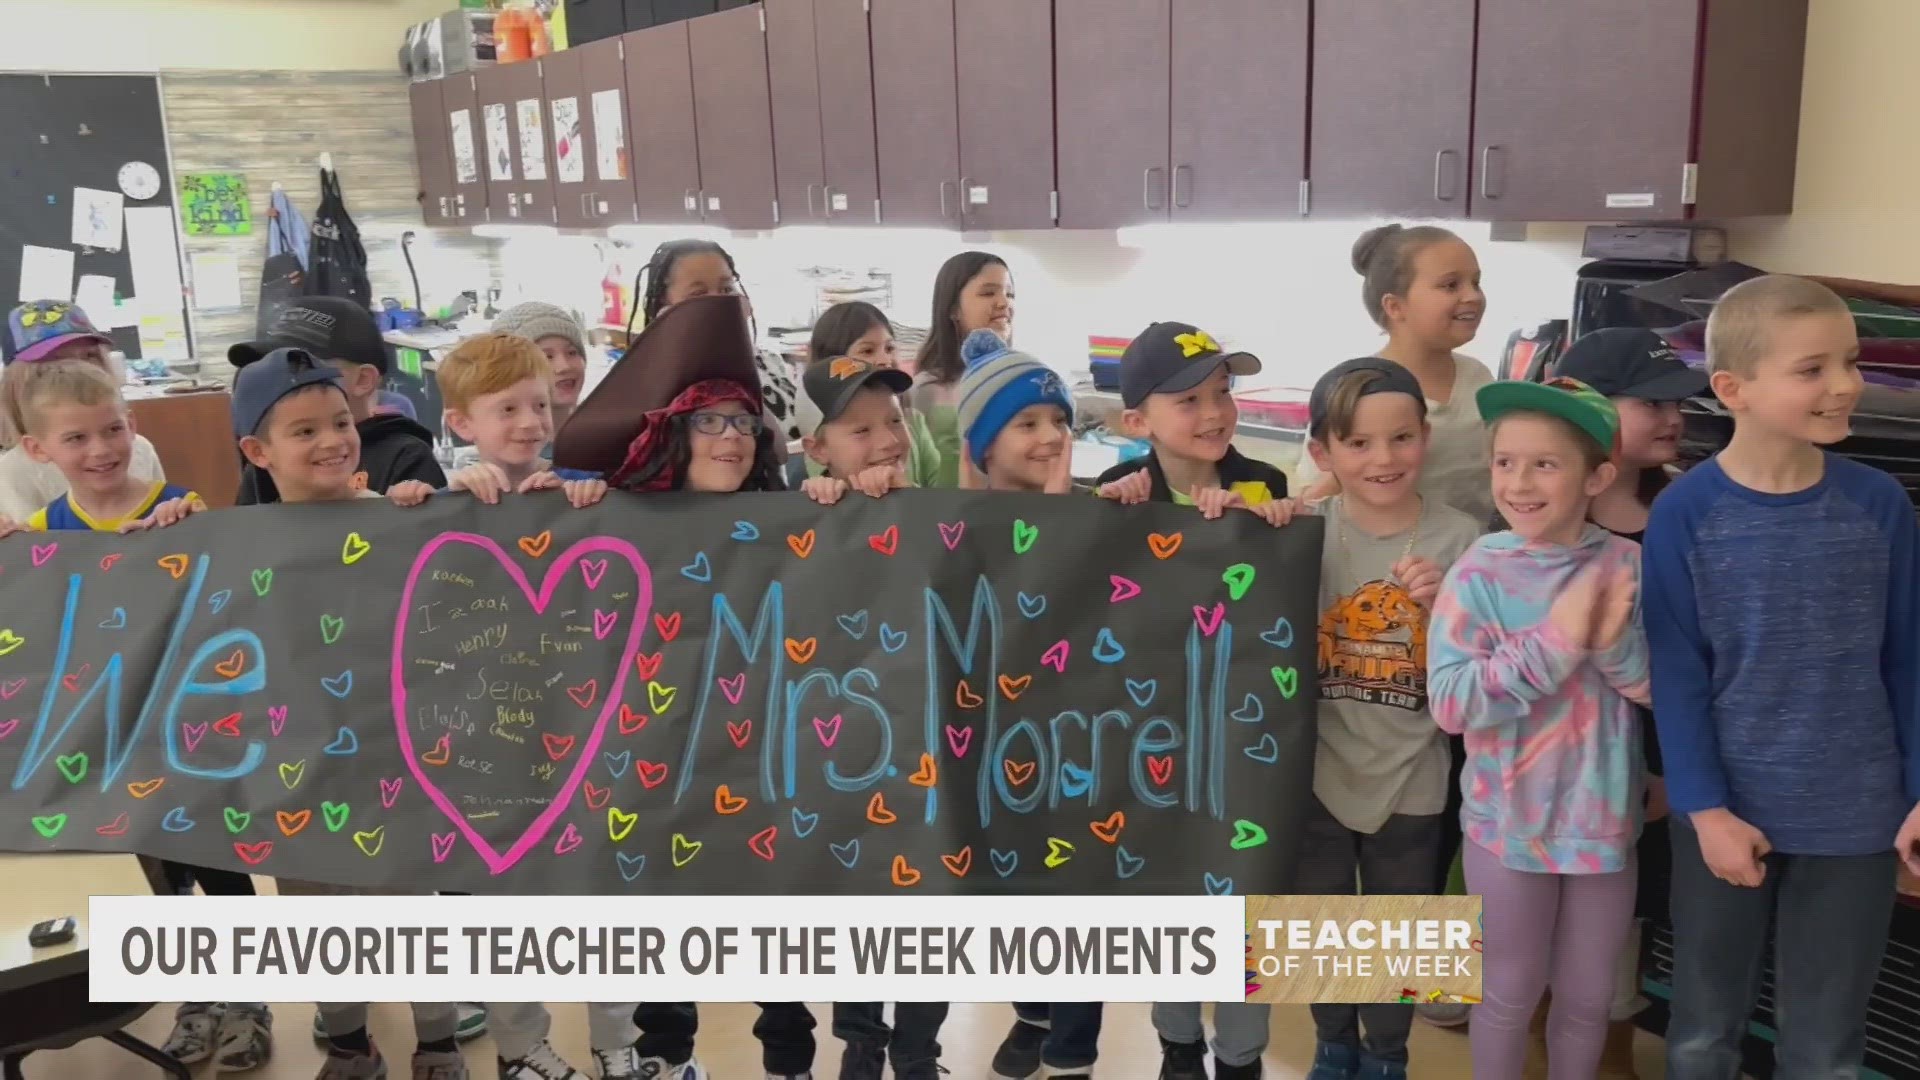 With the school year coming to a close for West Michigan, we decided to take a look back at some of our favorite Teacher of the Week moments this year.